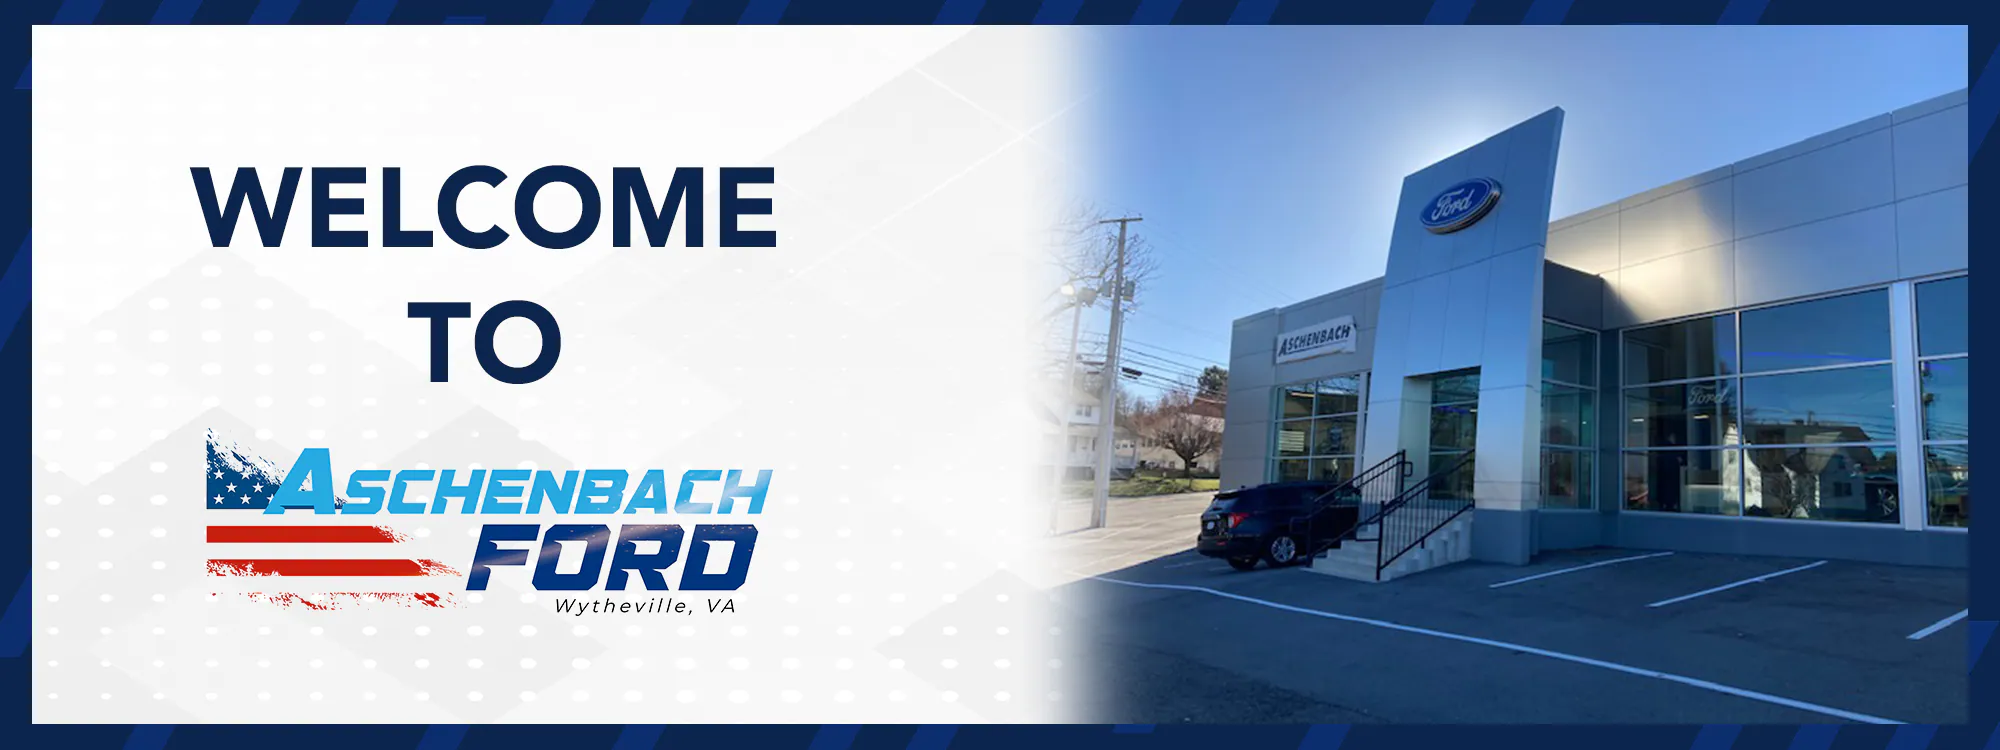 About Us | Aschenbach Ford in Wytheville VA